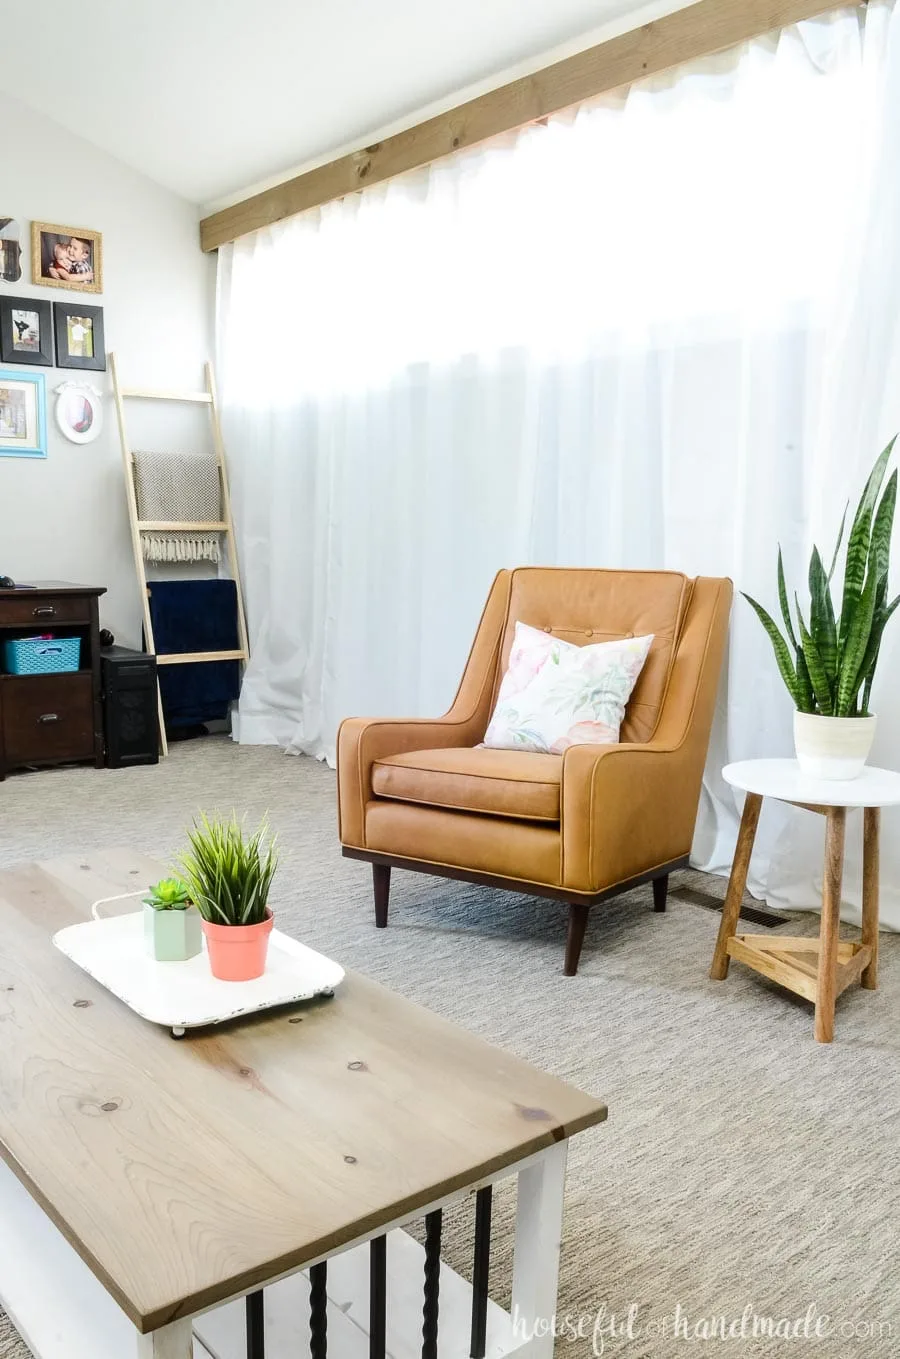 Doing a living room refresh does not mean getting all new furniture. We added a new leather armchair, coordinating end table and more to make our house new again. See our easy steps for refreshing your home for spring at Housefulofhandmade.com.